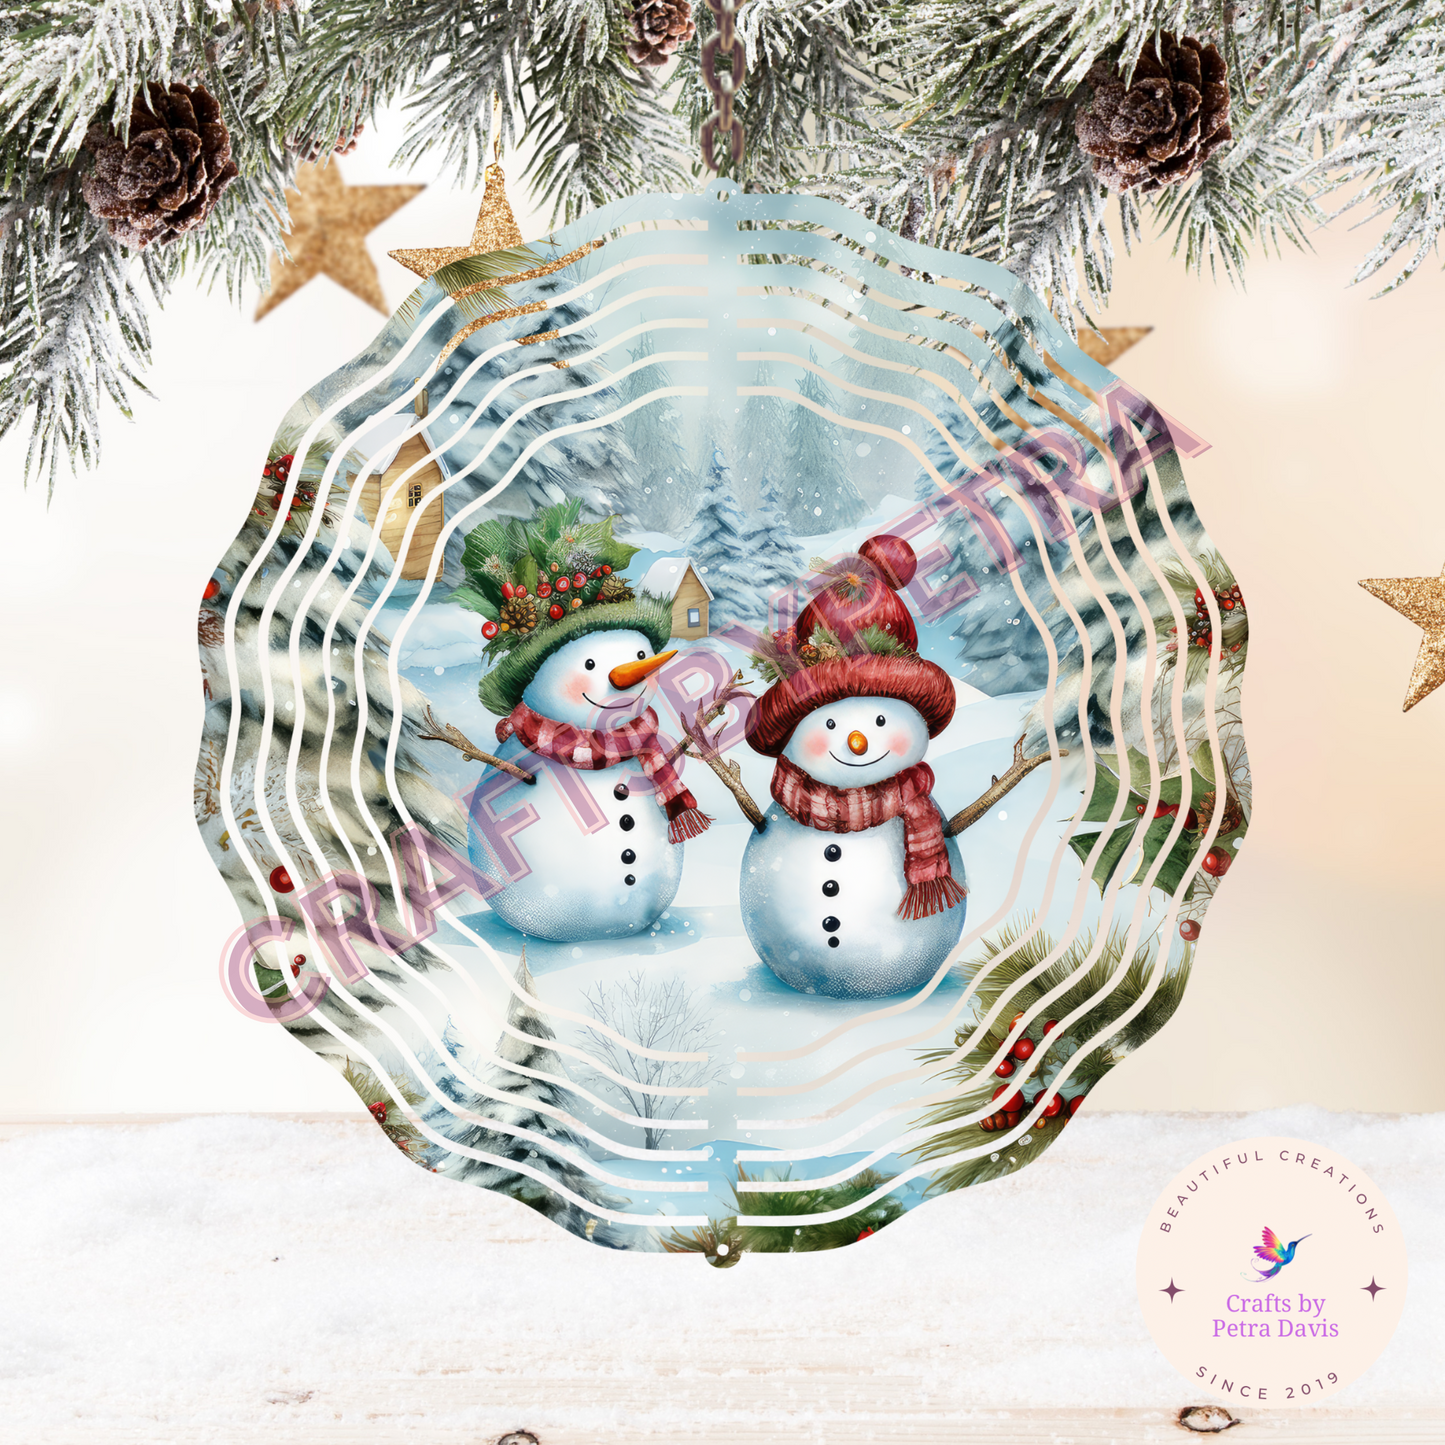 Sublimation 8” Christmas Wind Spinner